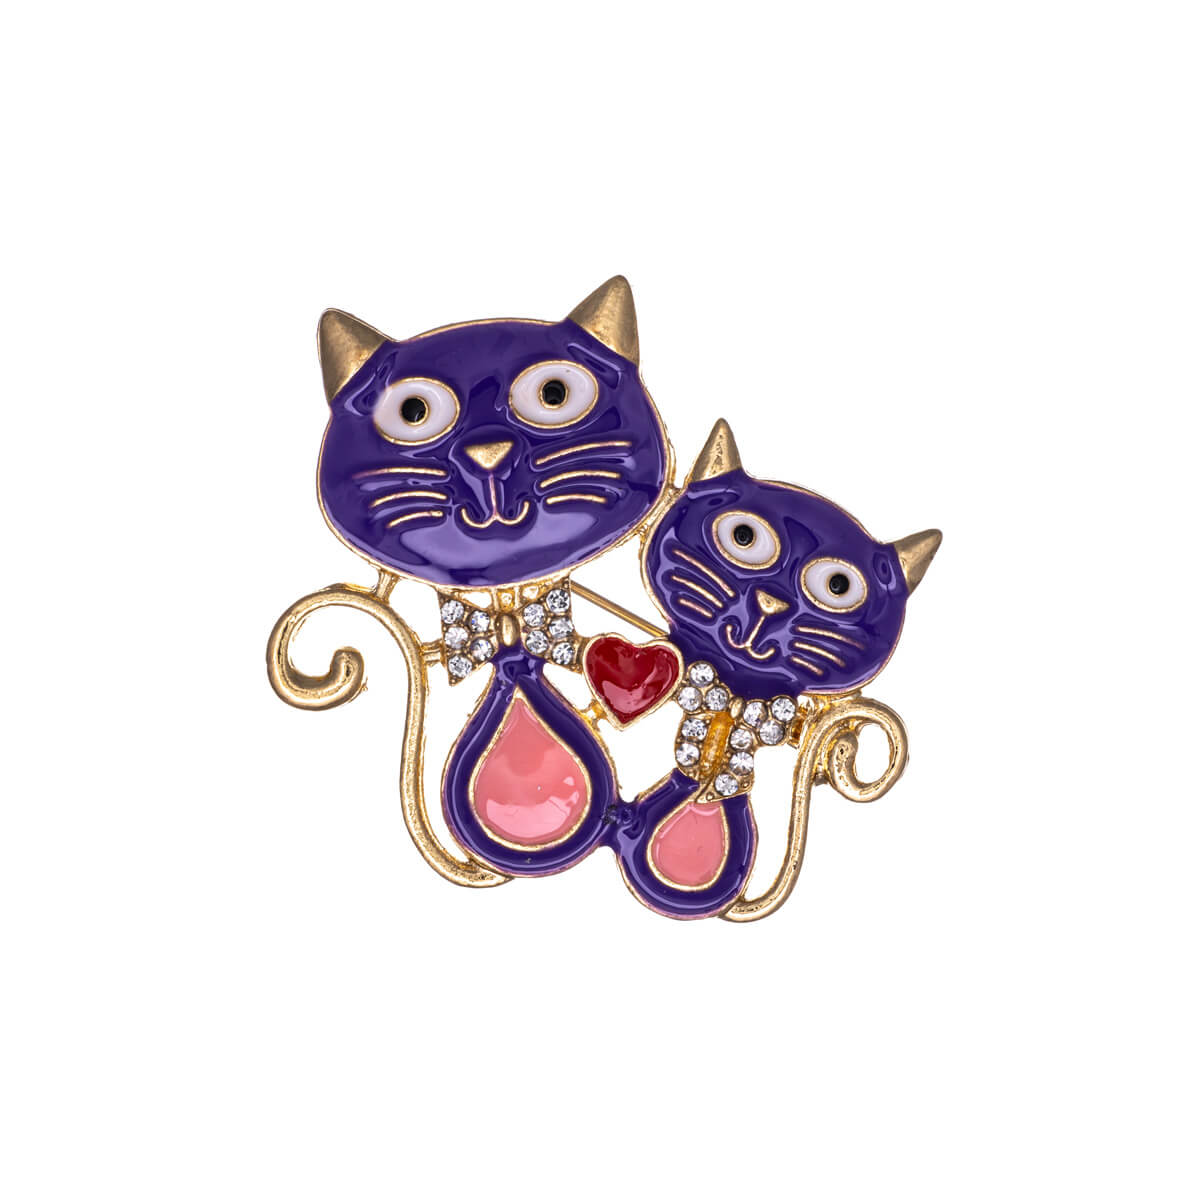 Two cats brooch